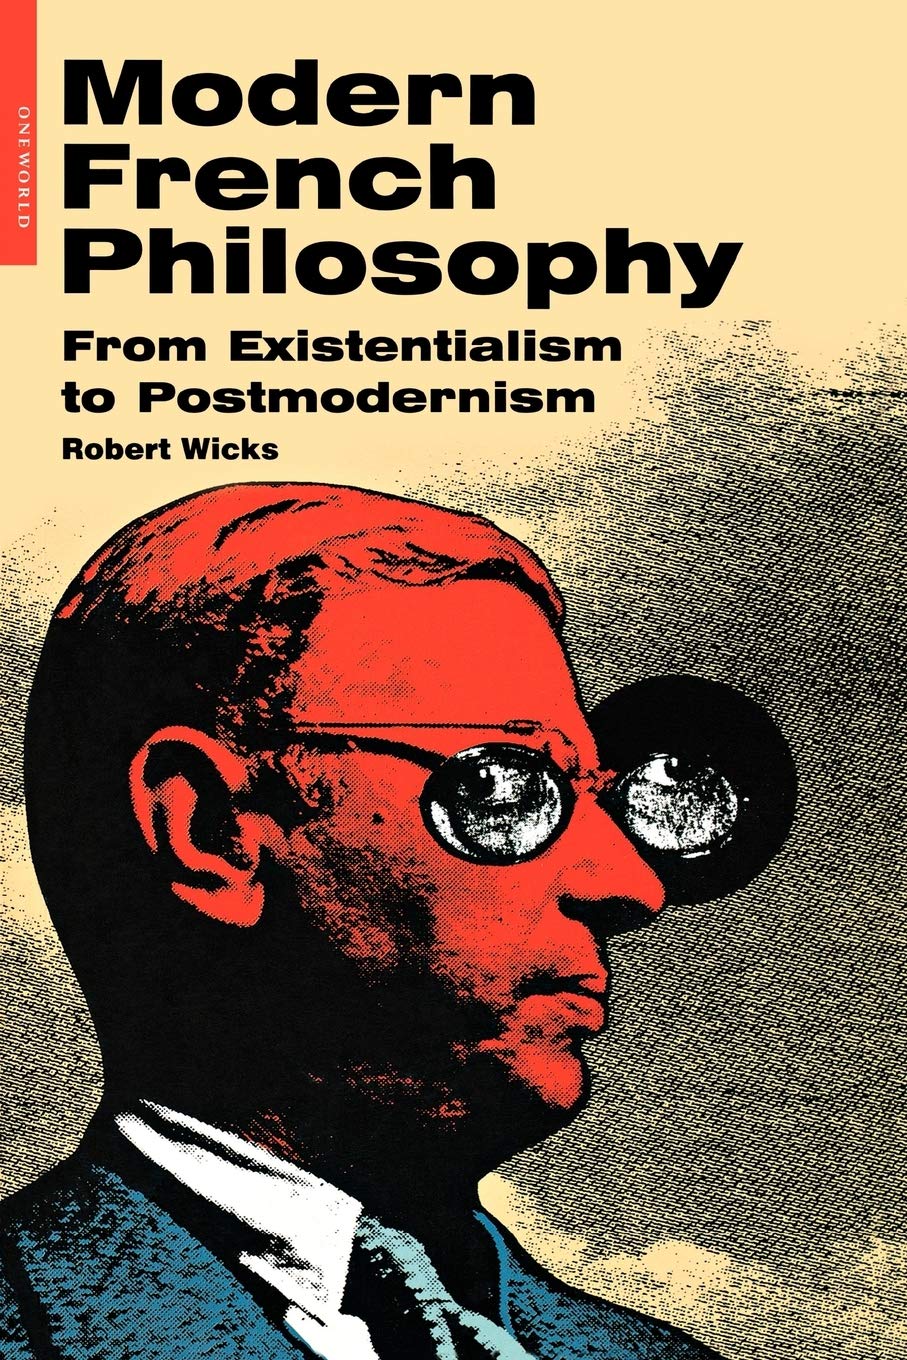 Modern French Philosophy: From Existentialism to Postmodernism